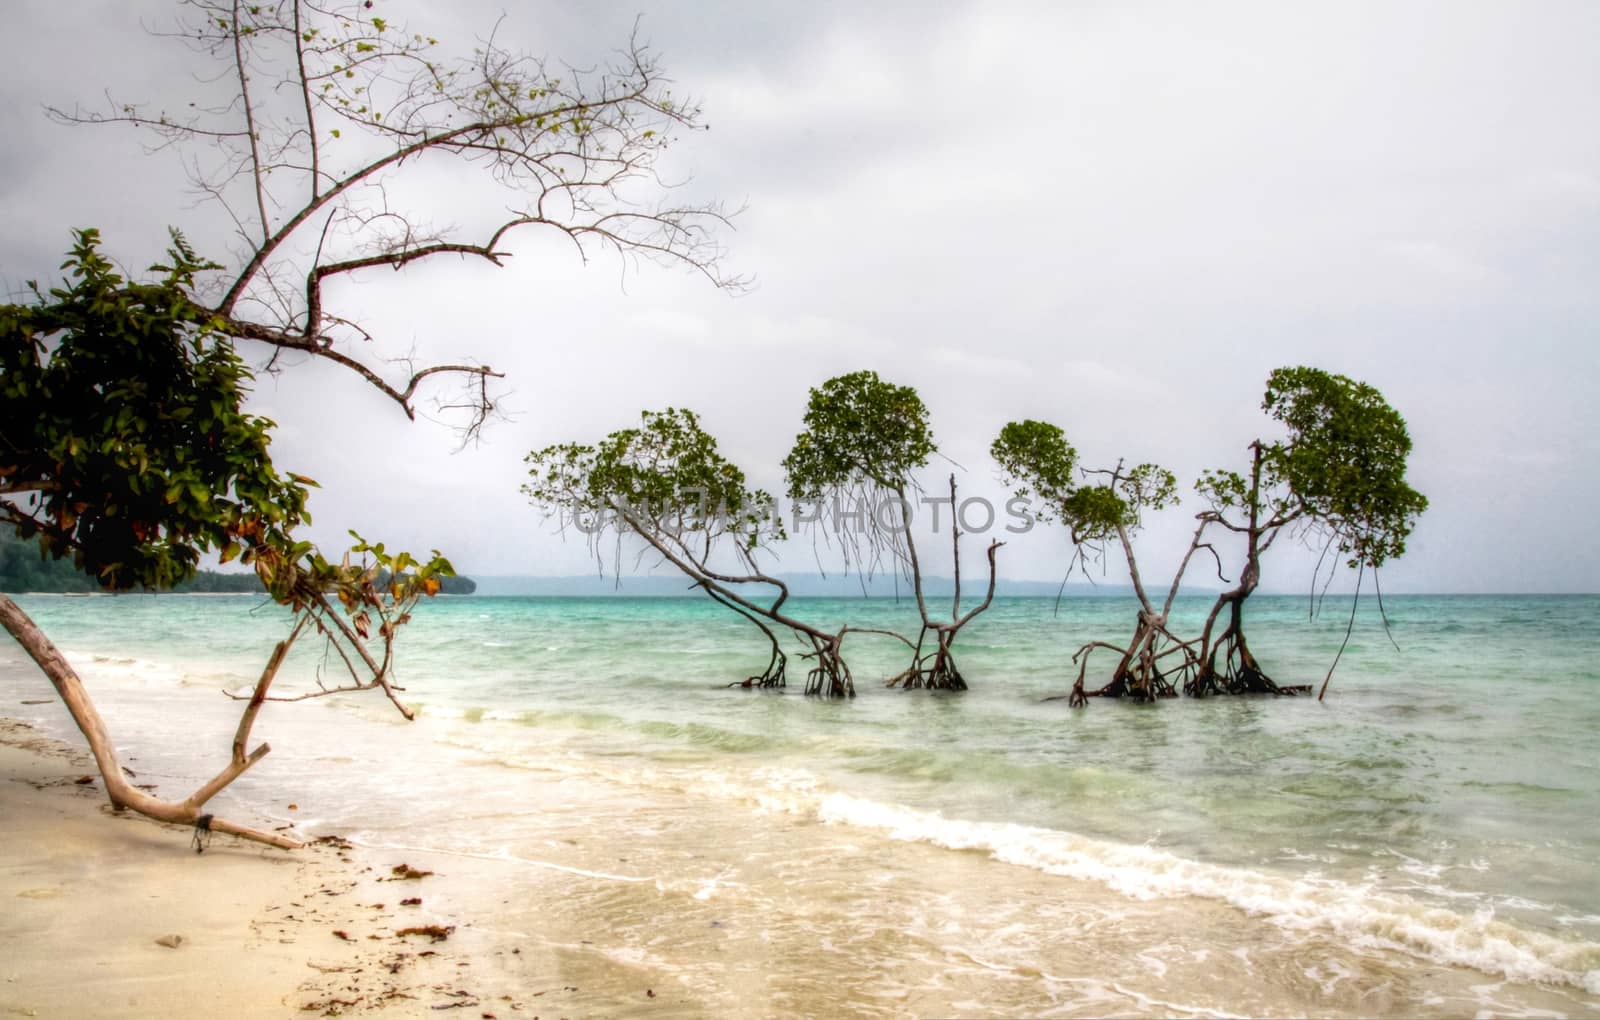 The Vijayanagar Beach on east coast of Havelock island in Andamans is usually very calm, but is disturbed here by the approaching storm reflected by the grey clouds and the ripples in sea. the four mangrove trees seem to stand guard and the branches of a tree on the beach provide a frame.